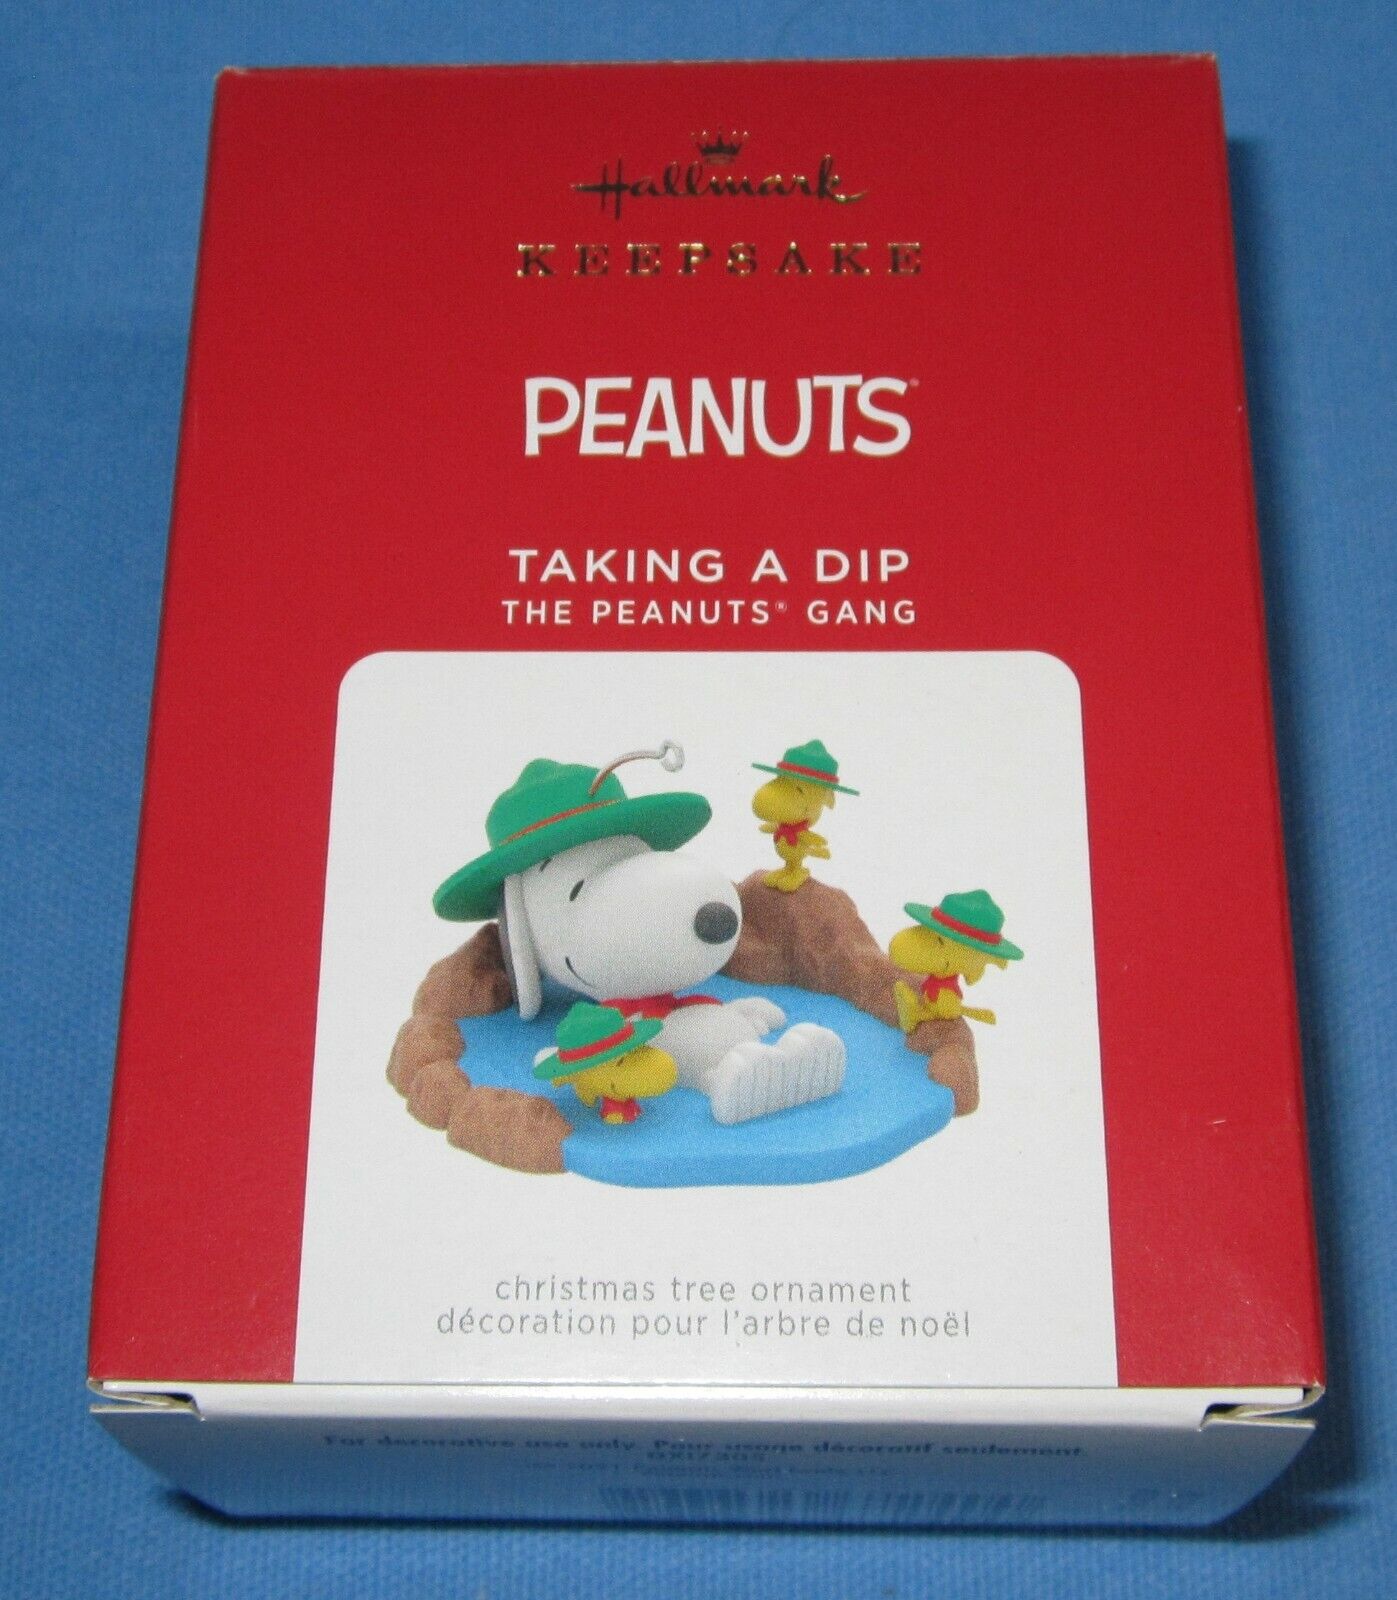 2021 Hallmark Peanuts Gang Ornament ~ Taking a Dip ~ Snoopy & Woodstock, Scouts